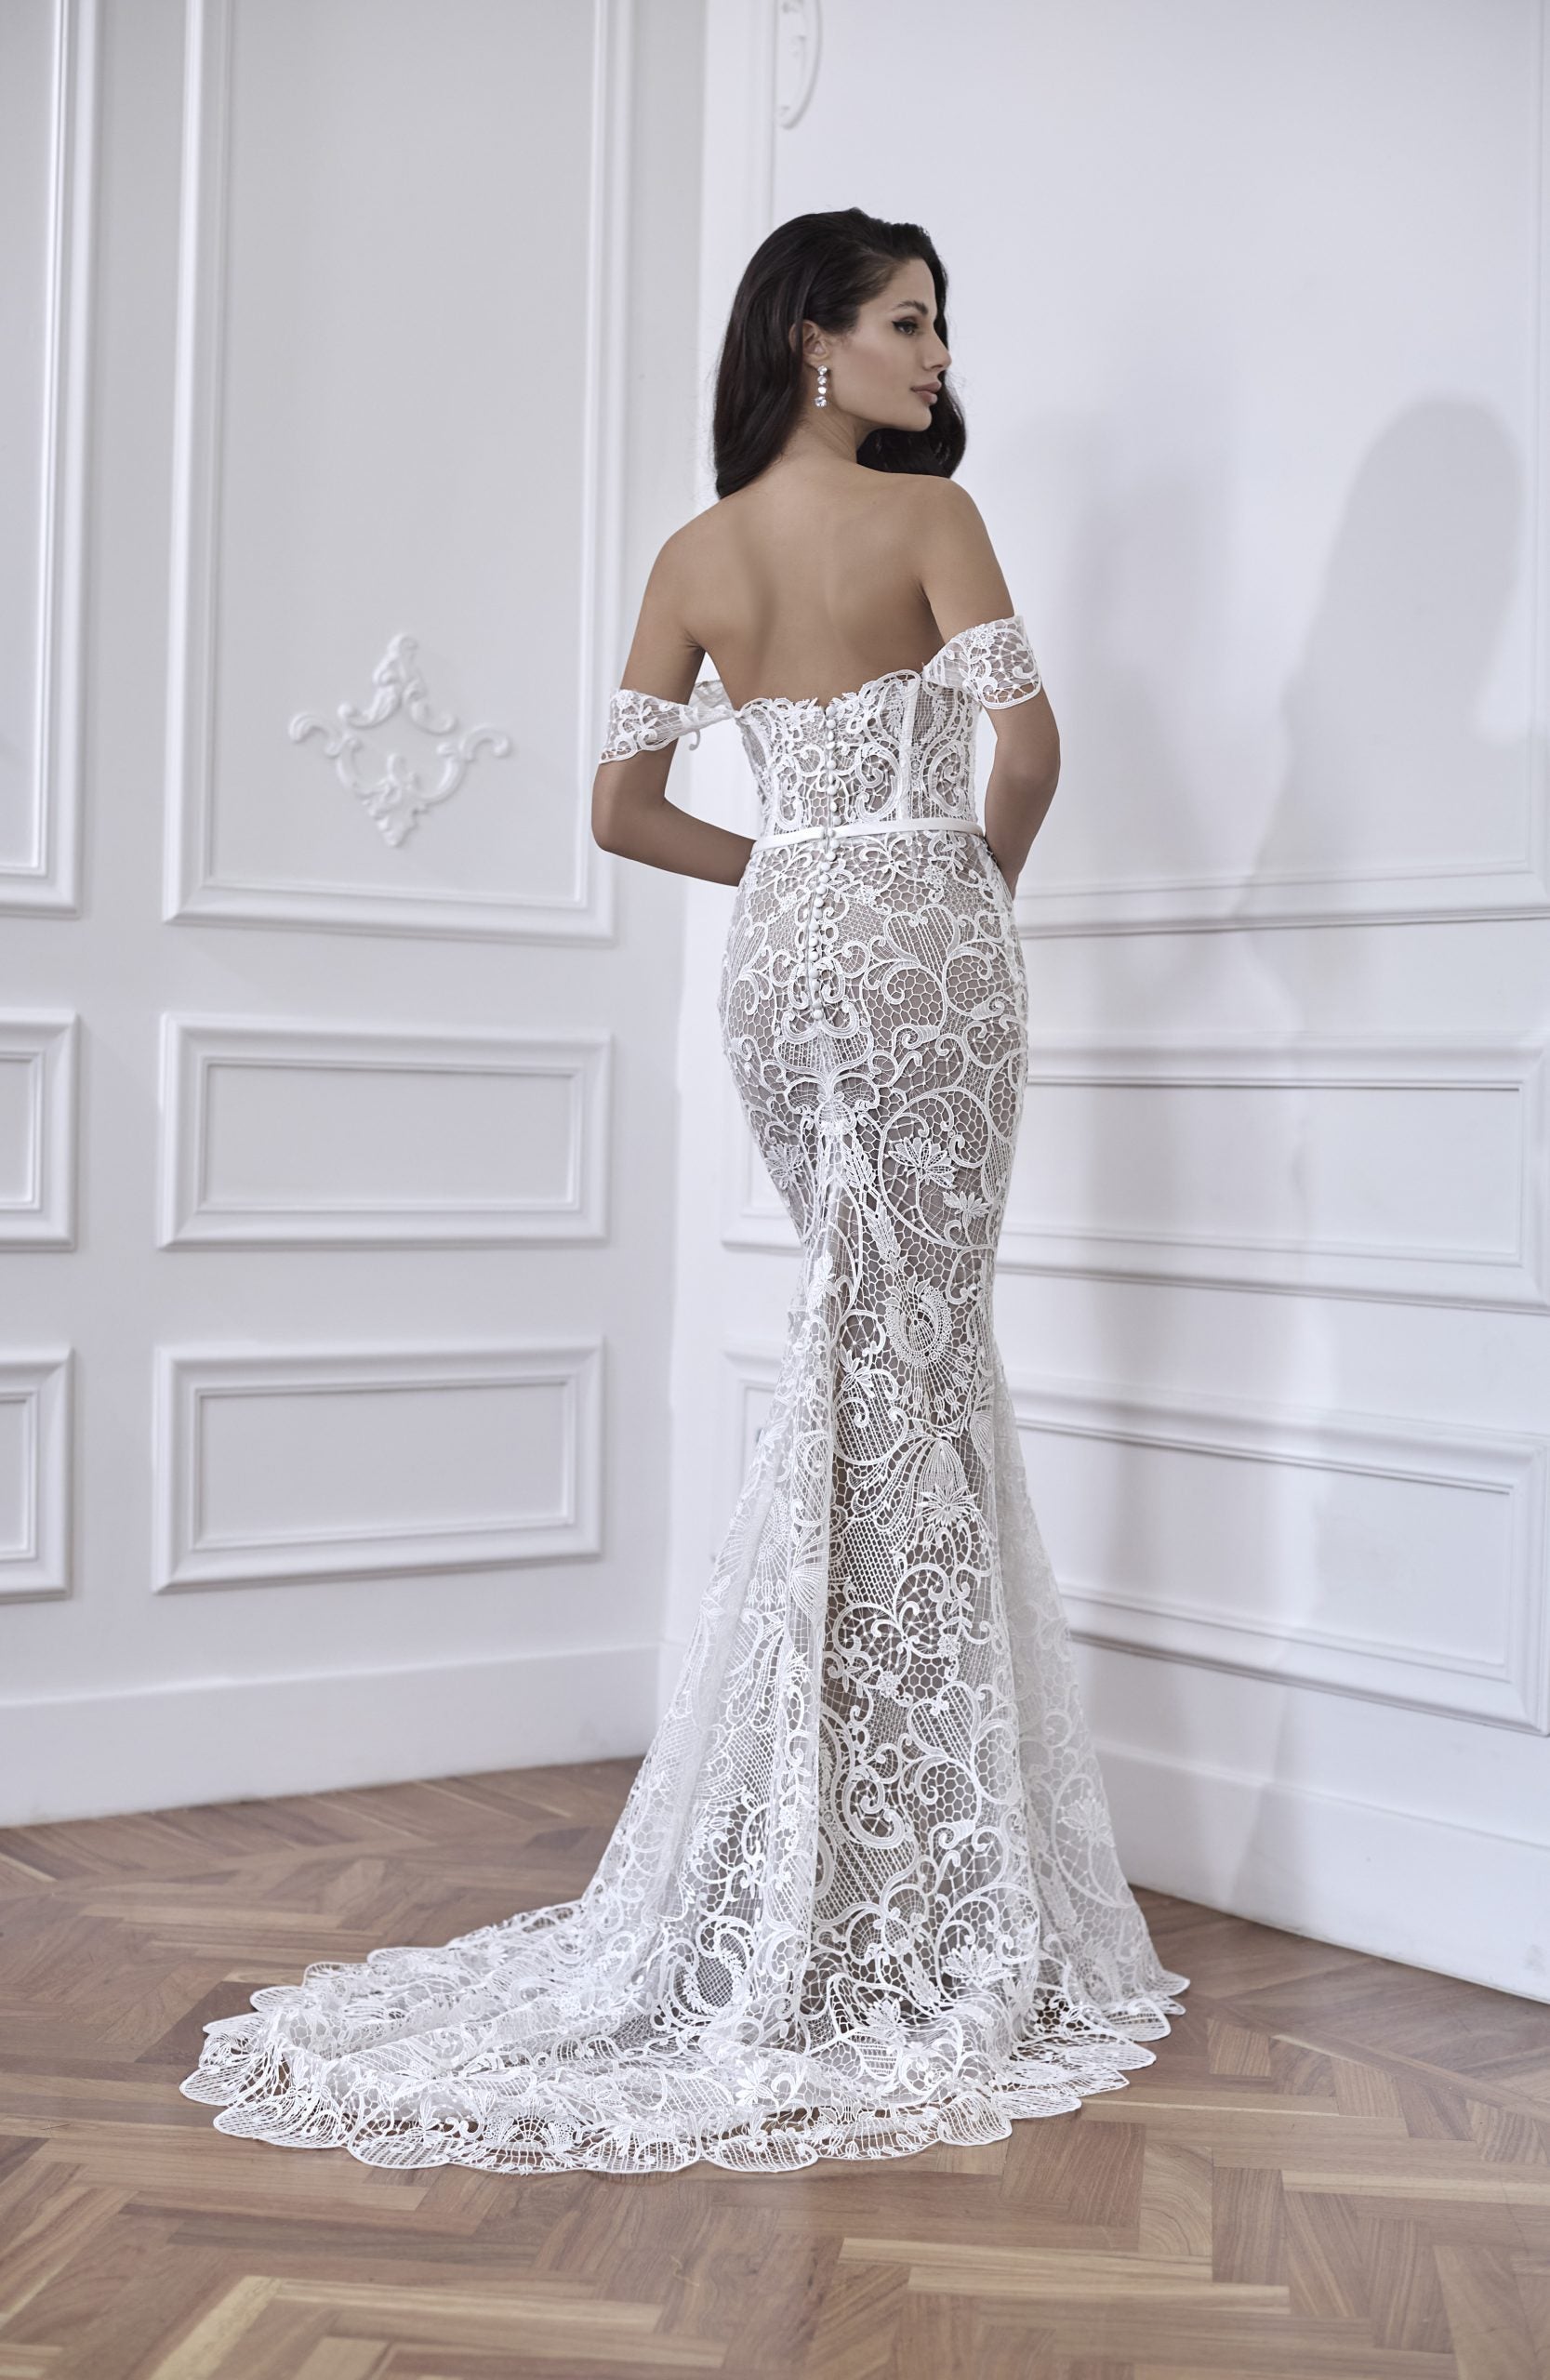 Off The Shoulder Lace Fit And Flare Wedding Dress by Maison Signore - Image 2